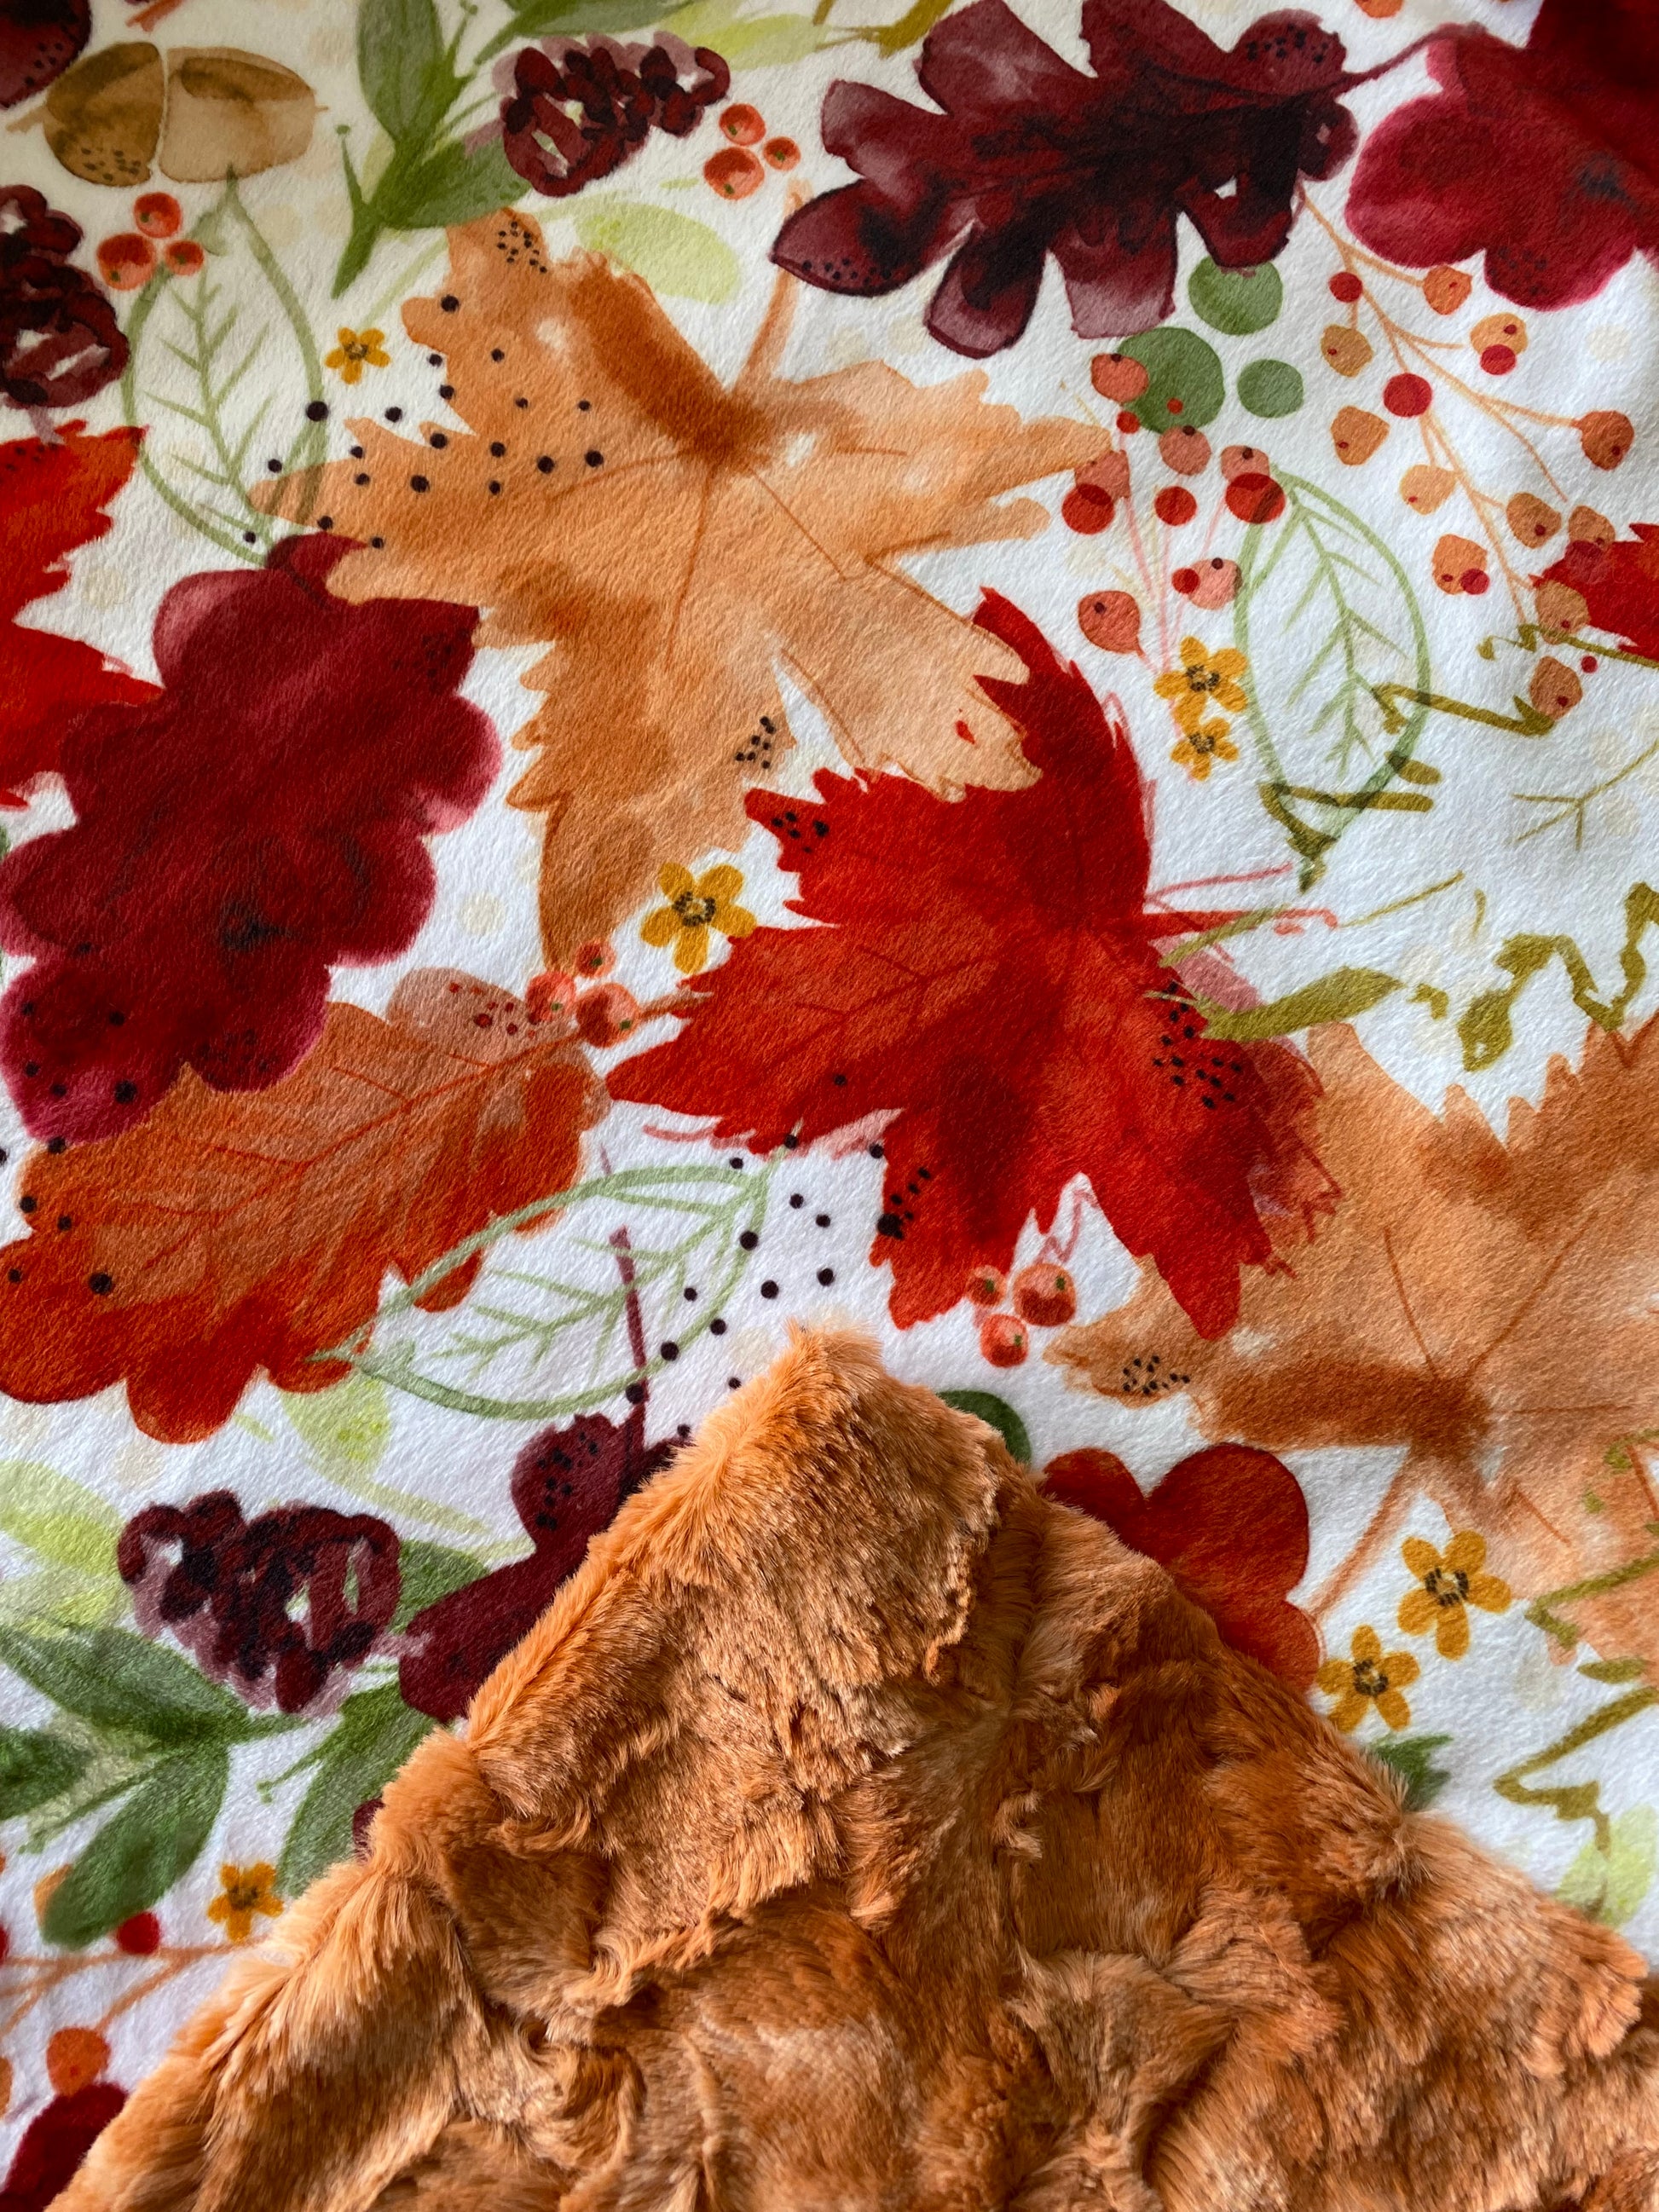 Autumn Leaves on Ginger Galaxy Large Minky Blanket - Soft and Cozy Texture - 53x65